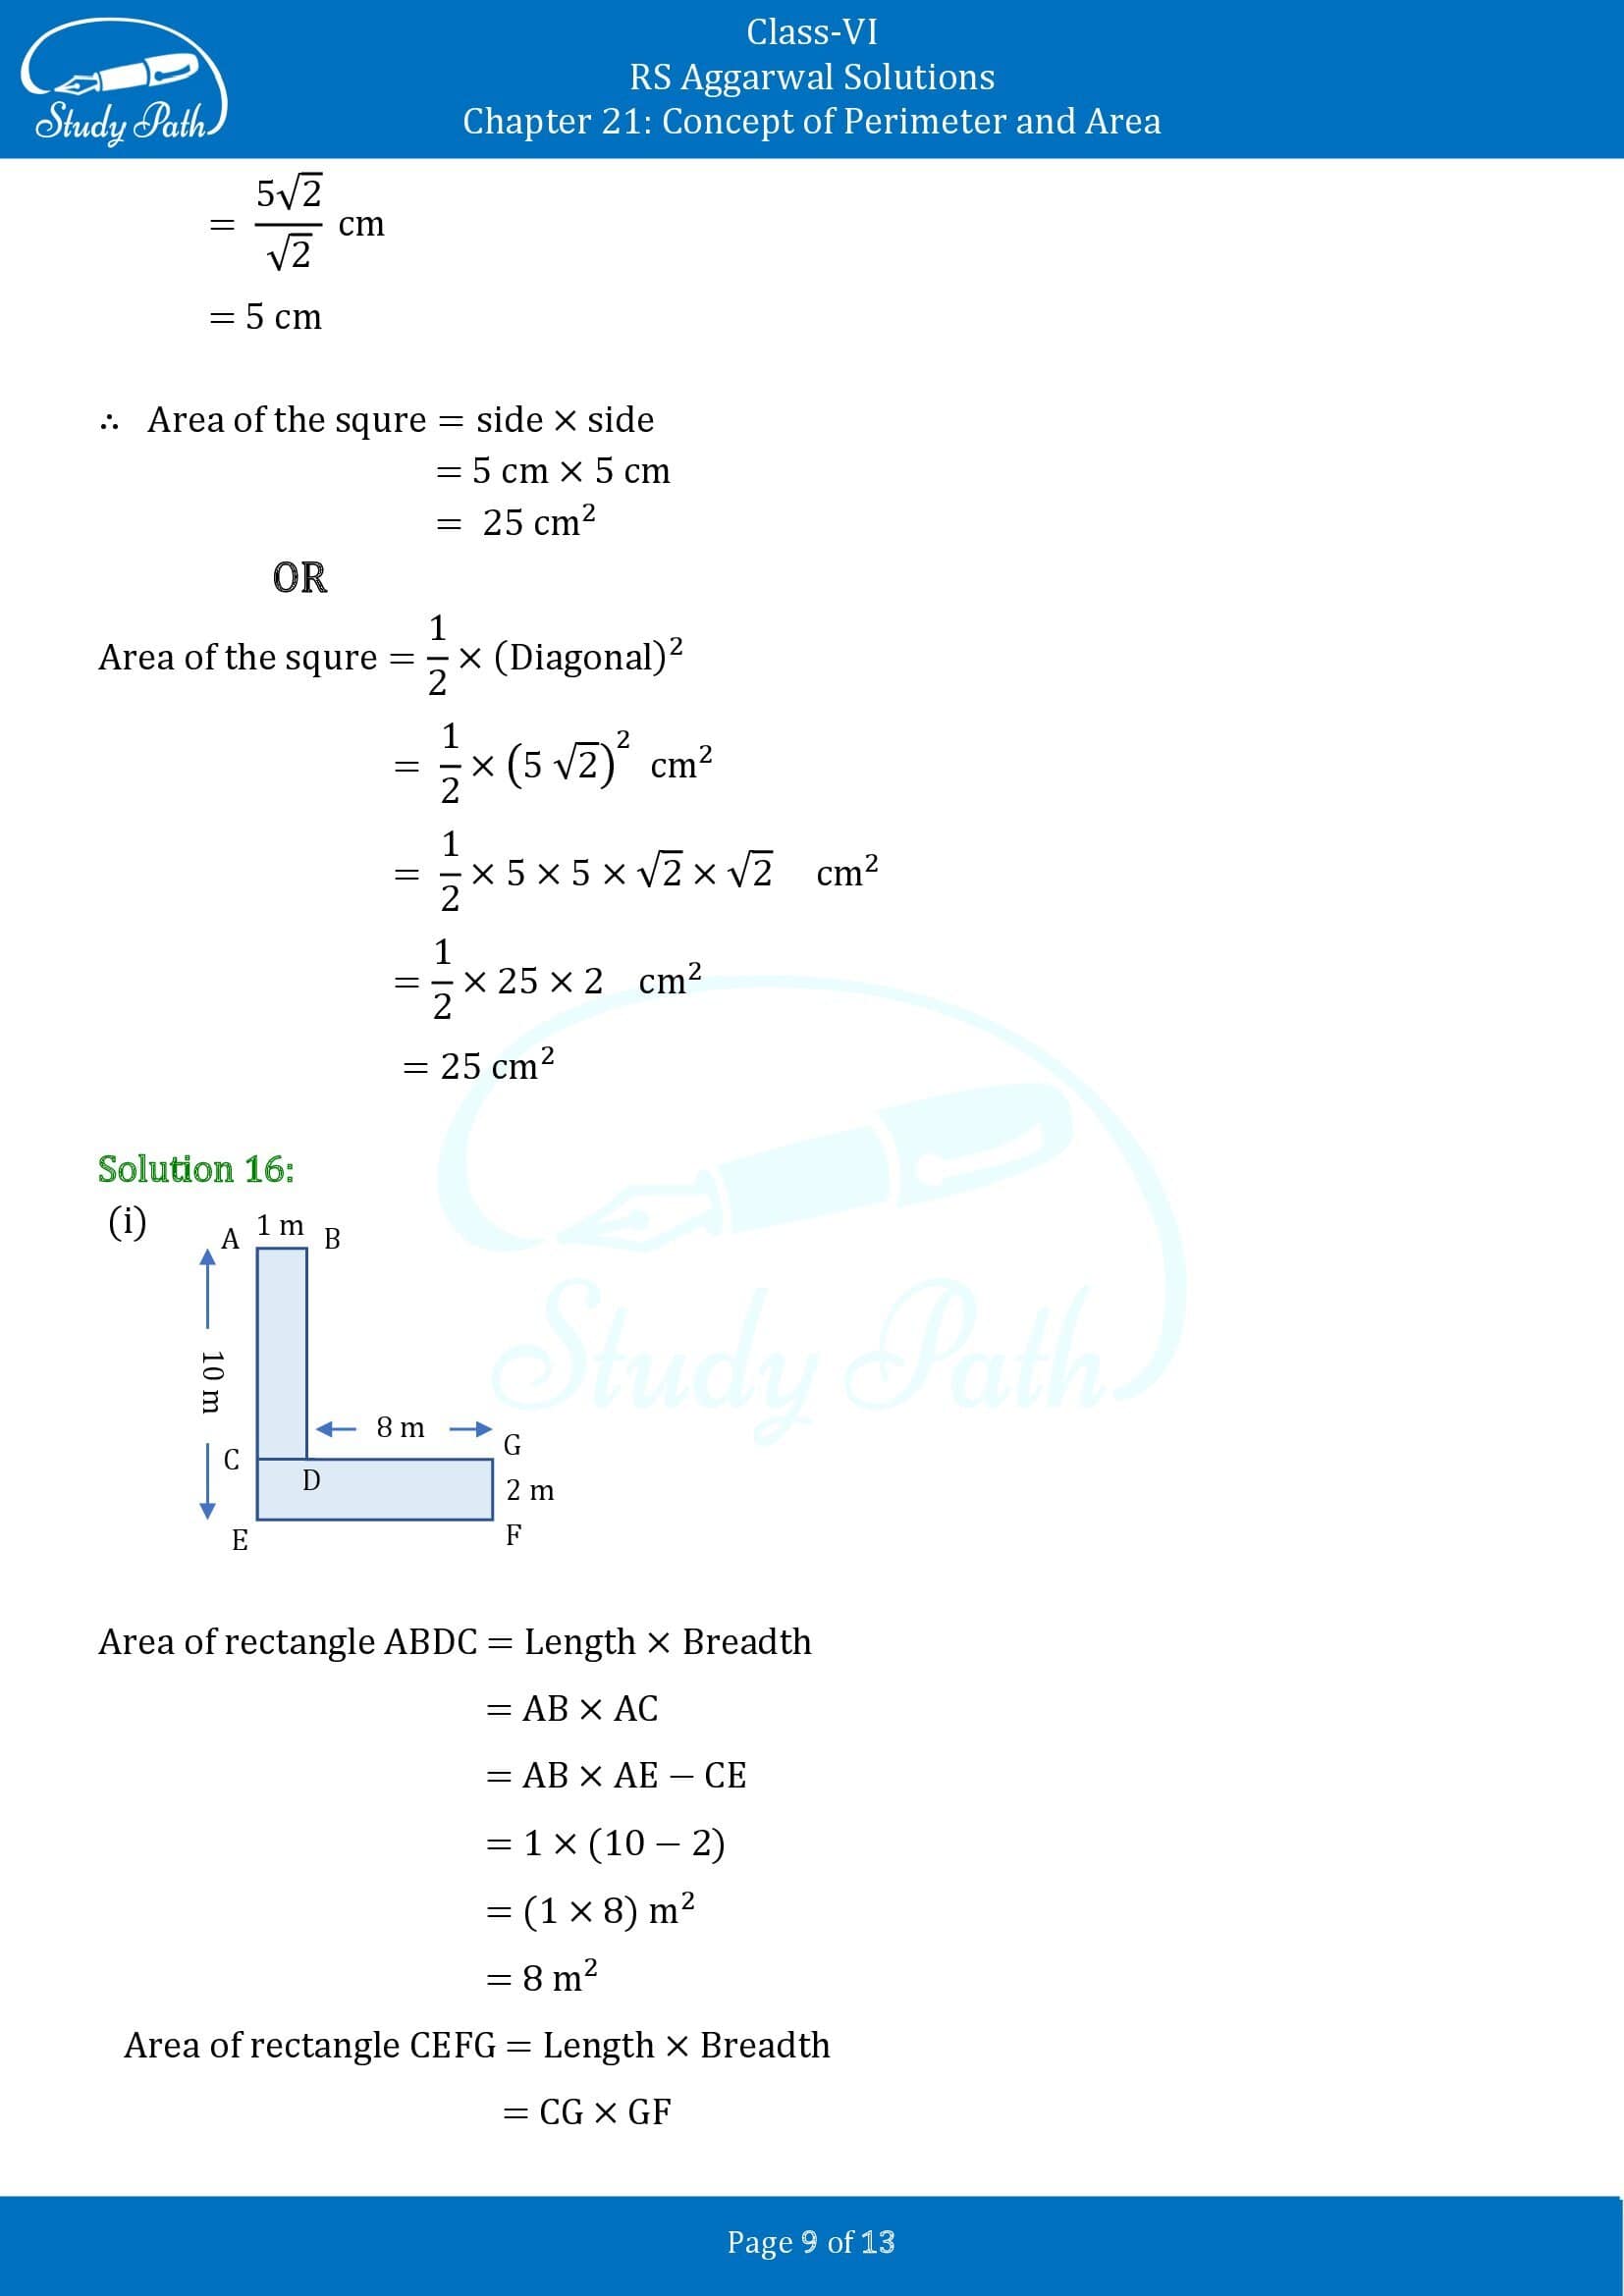 RS Aggarwal Solutions Class 6 Chapter 21 Concept of Perimeter and Area Exercise 21D 00009